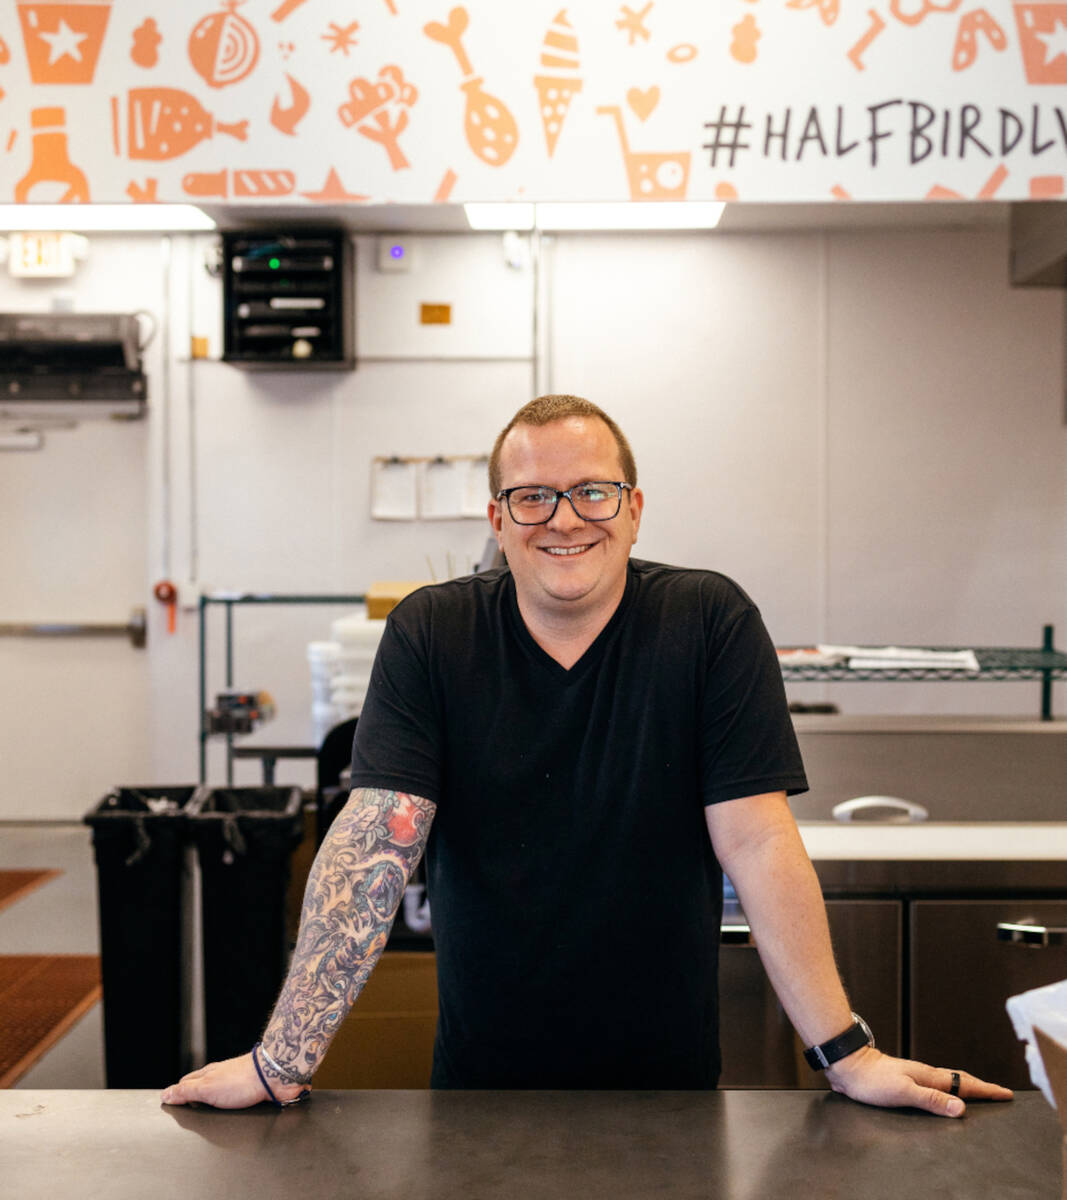 Brian Howard, chef-owner of Half Bird Chicken & Beer, which closed its original location in ...